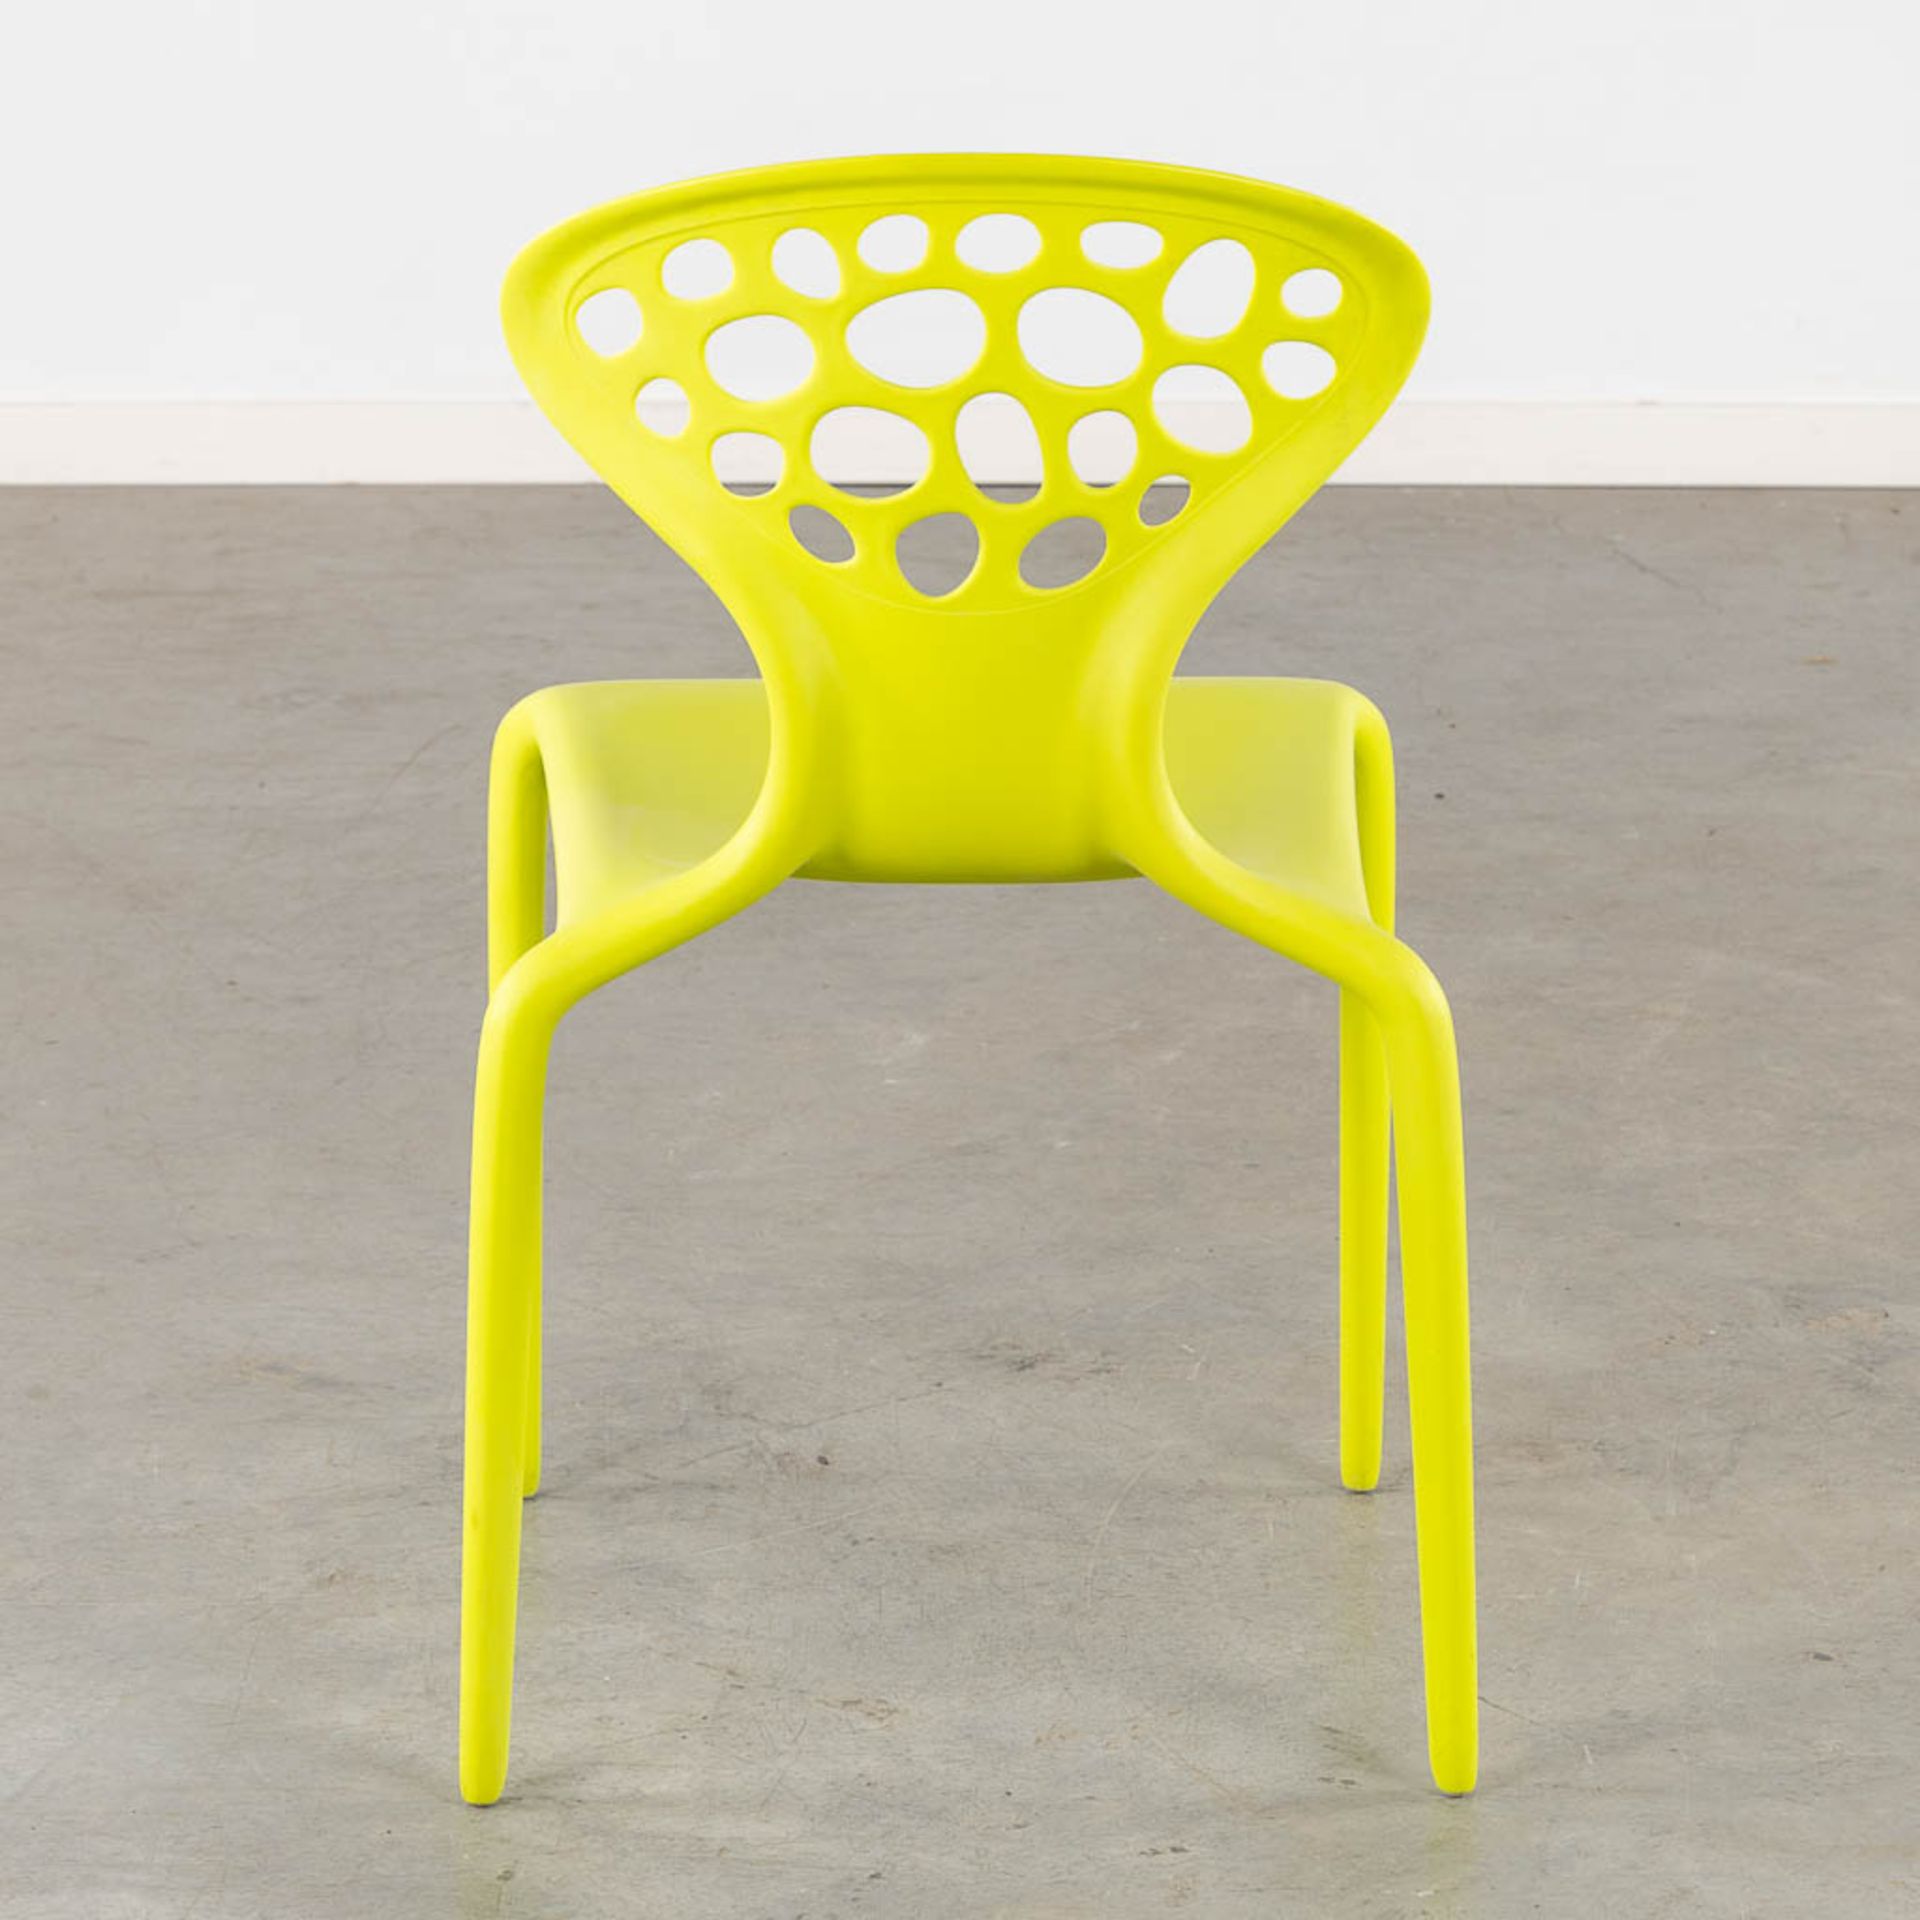 Ross LOVEGROVE (1958) 'Supernatural Chairs' (2005) for Morosso, Italy. (L:48 x W:48 x H:82 cm) - Image 5 of 11